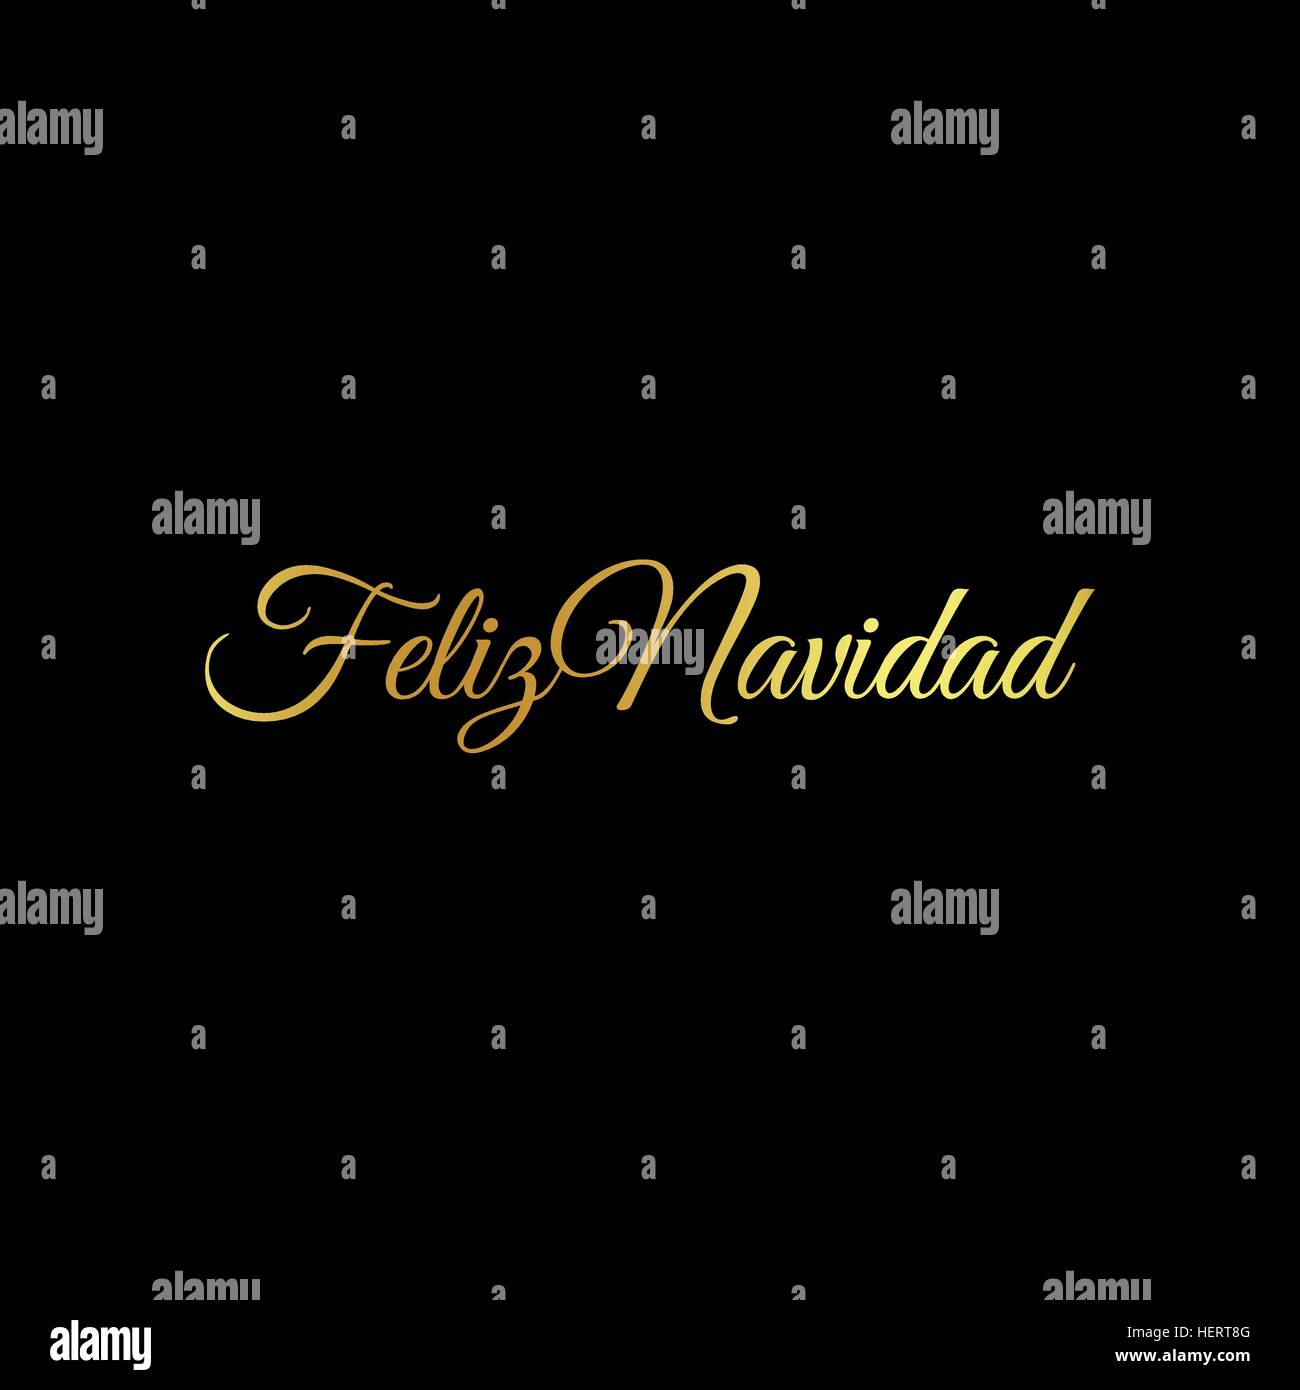 Feliz Navidad words vector illustration. Lettering Christmas and New Year holiday calligraphy phrase isolated on the black background. Golden color Spanish greeting card. Stock Vector